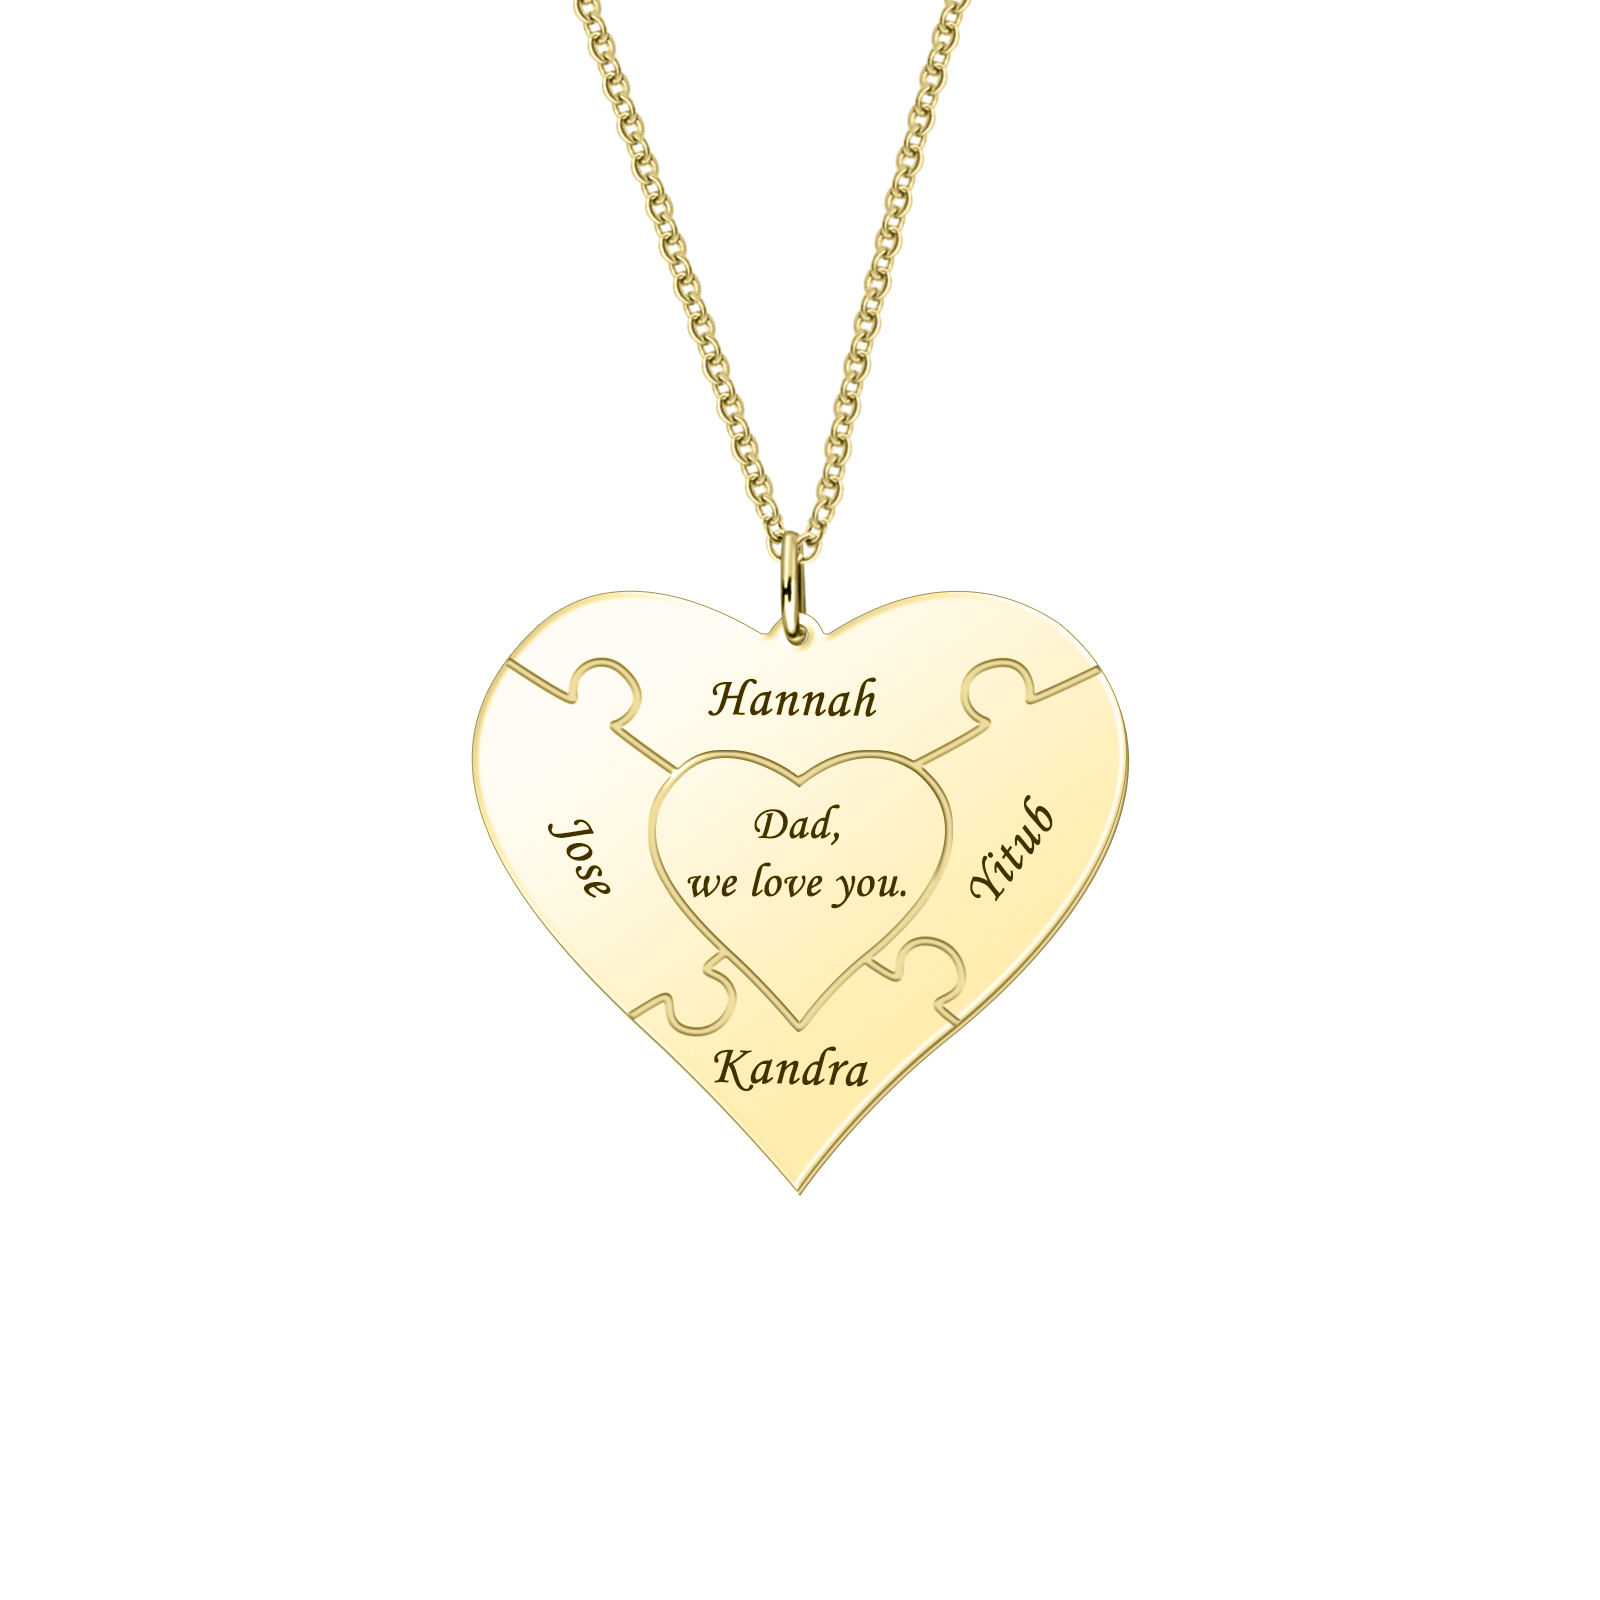 Personalized Gold Plated Heart Necklace Puzzle Necklace with Engraving